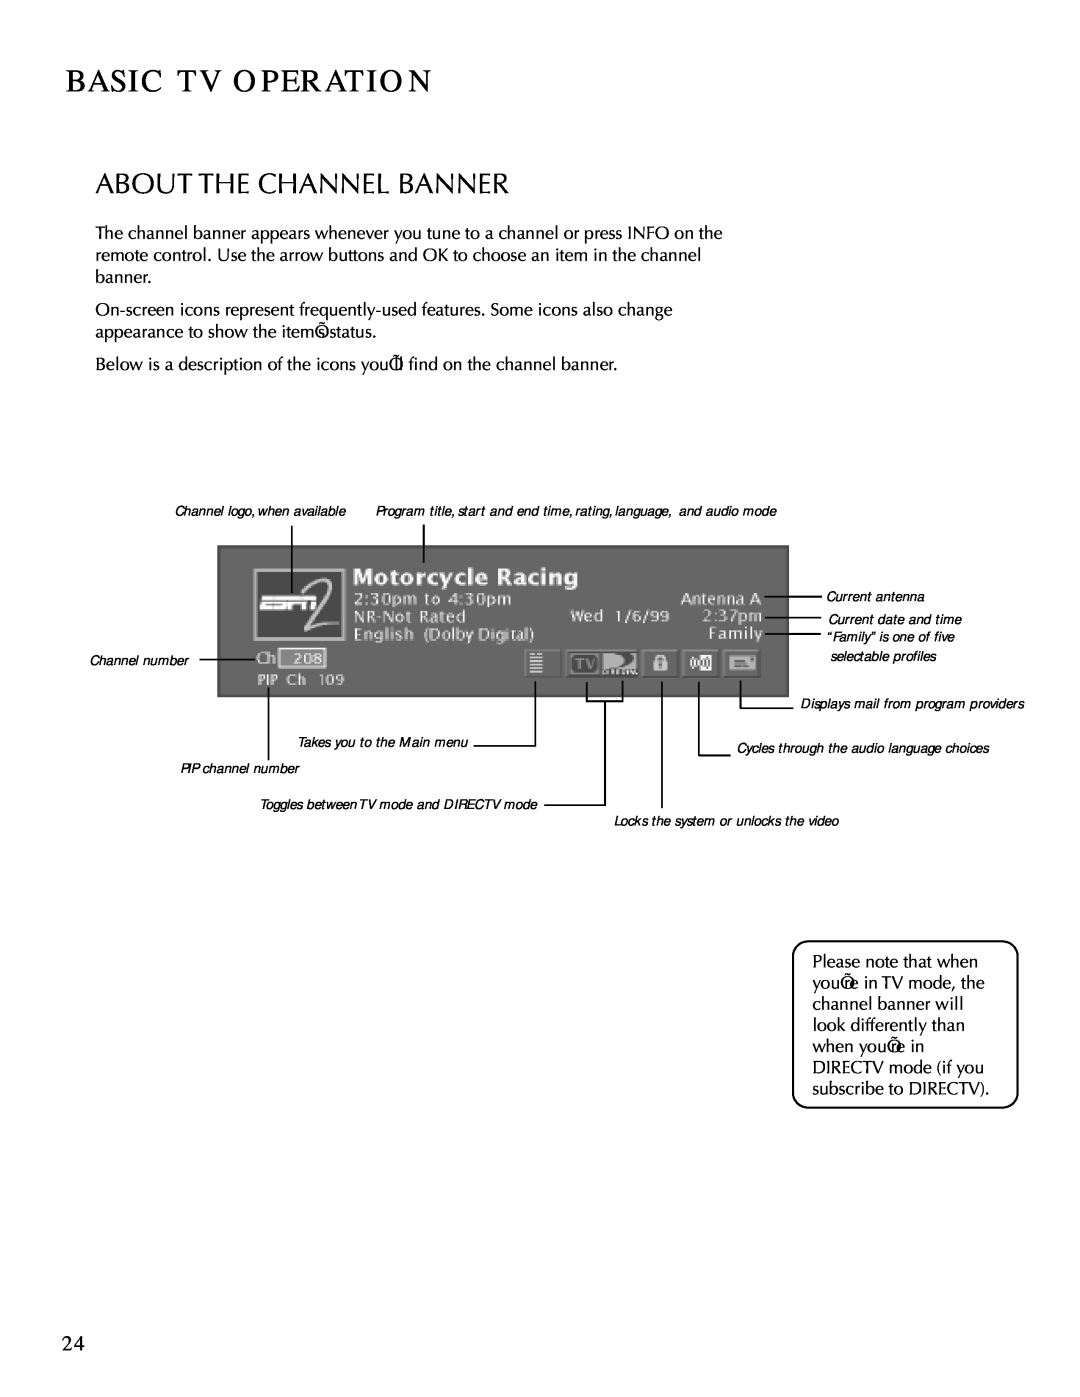 DirecTV HDTV user manual Basic Tv Operation, About The Channel Banner 